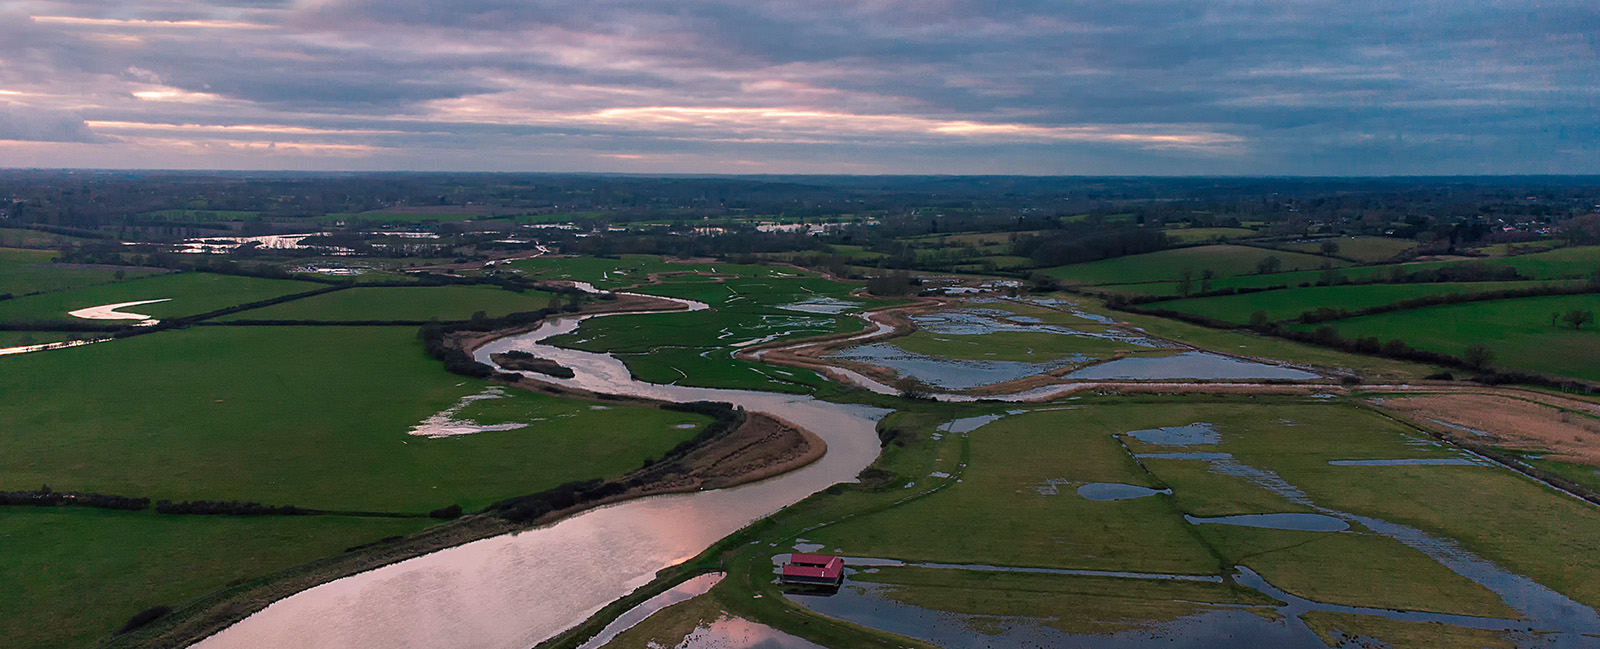 The flooded River Stour on the Essex-Suffolk border taken from a drone in the UK